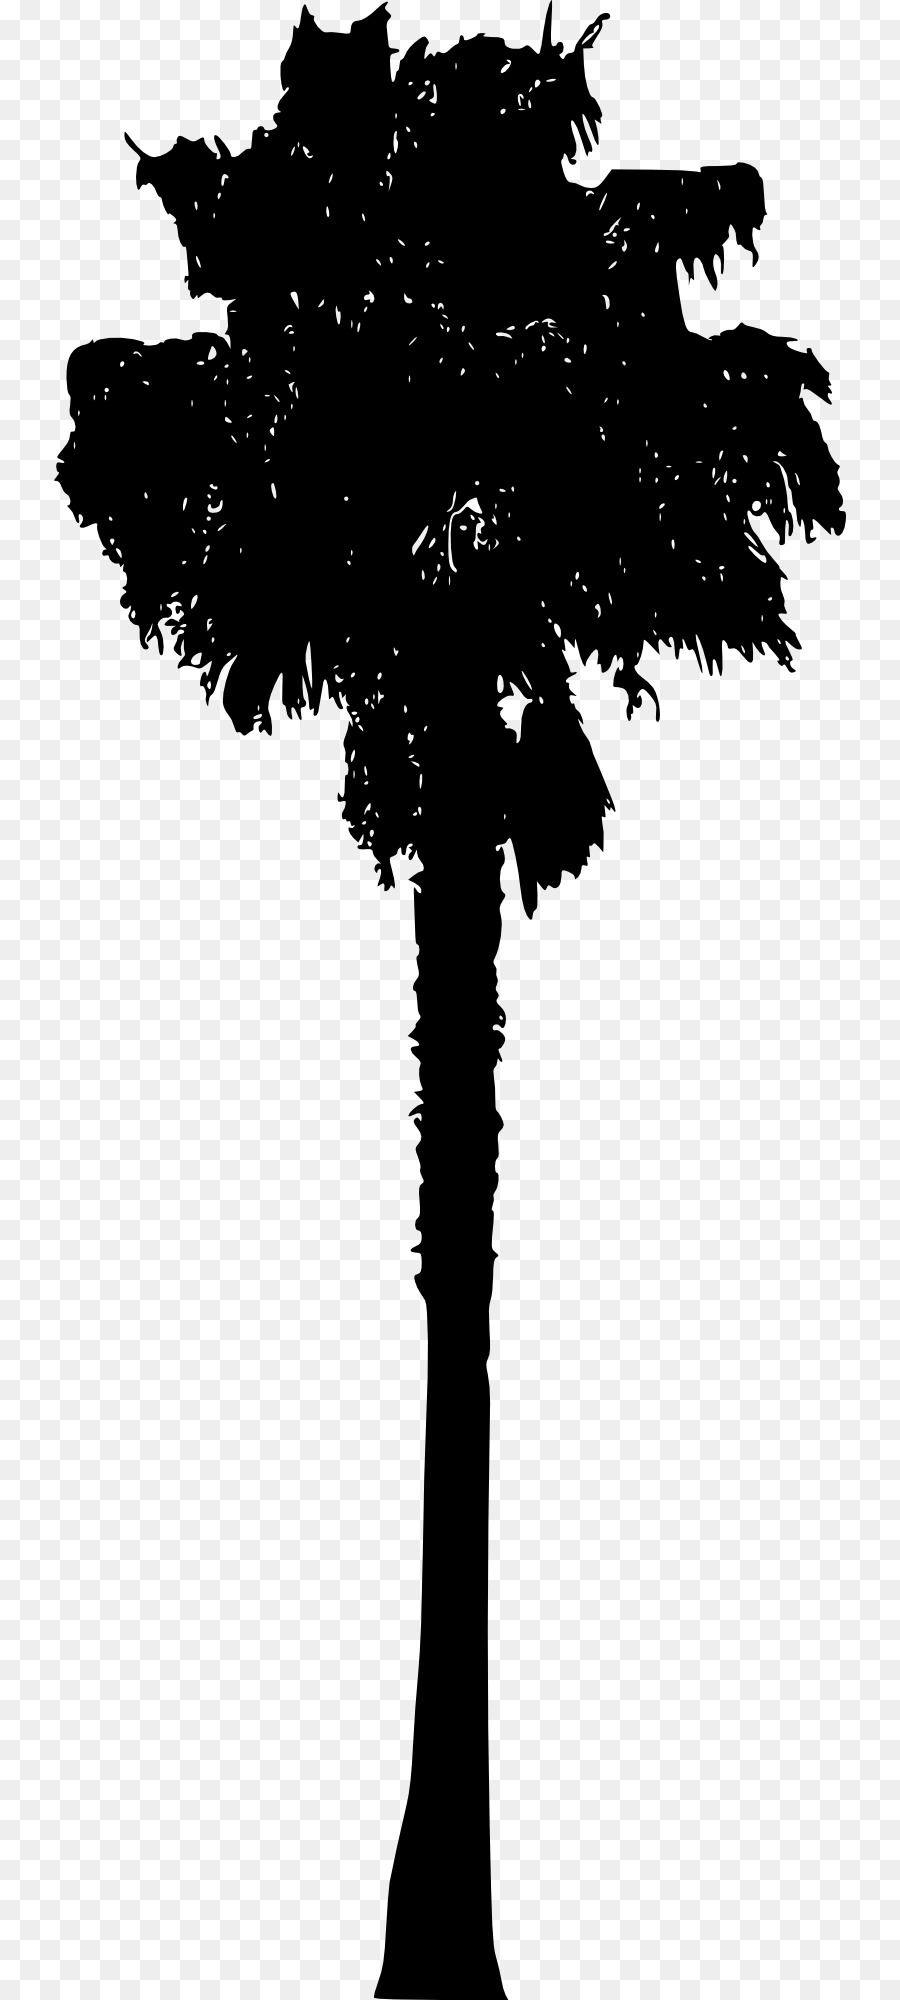 Arecaceae Silhouette - Silhouette png download - 792*2000 - Free Transparent Arecaceae png Download.